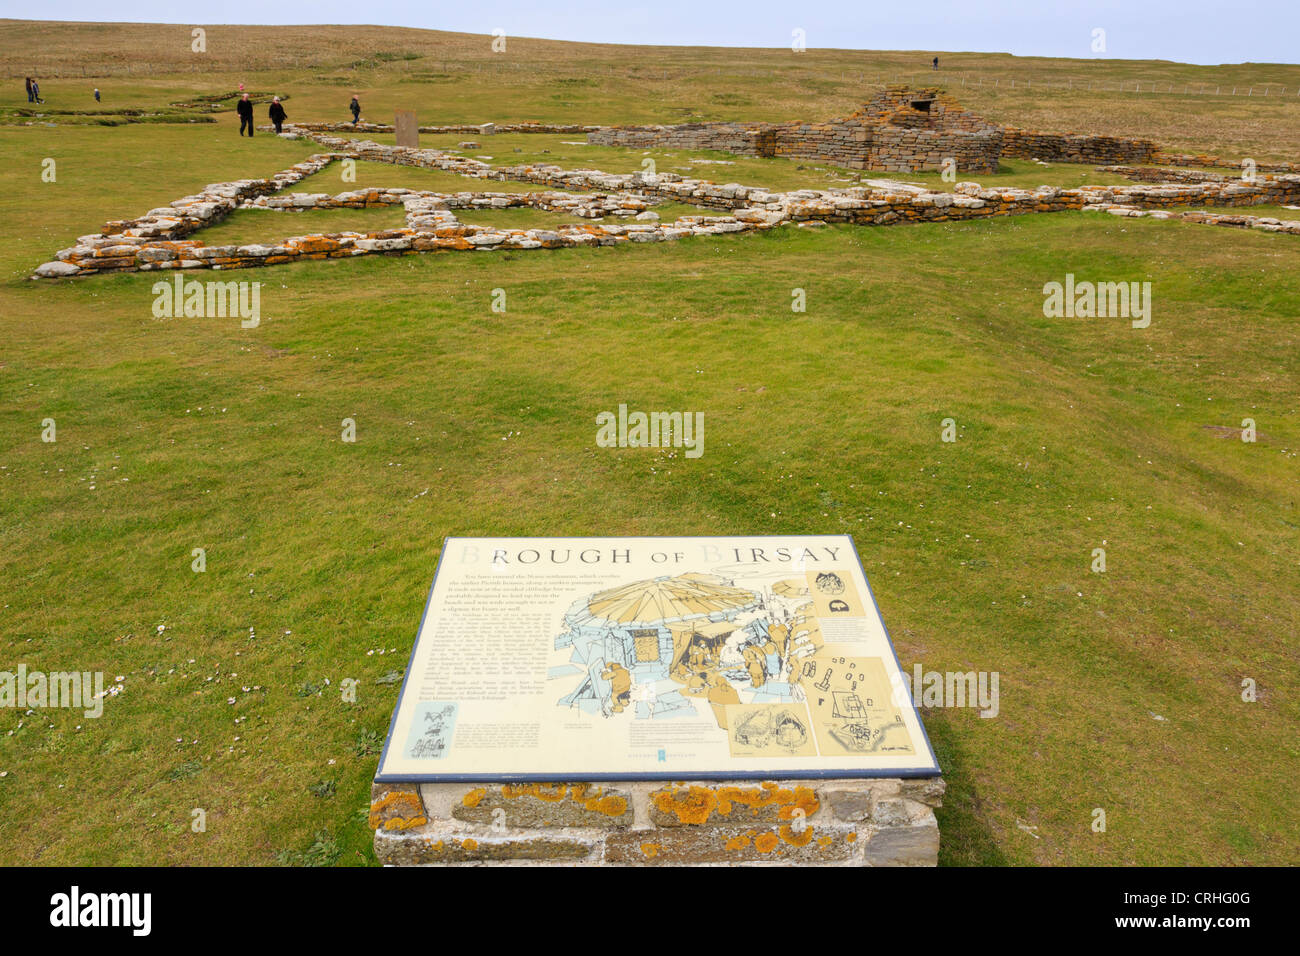 Tourist information sign about Pictish and Norse settlement excavated on the Brough of Birsay, Orkney Islands, Scotland, UK Stock Photo